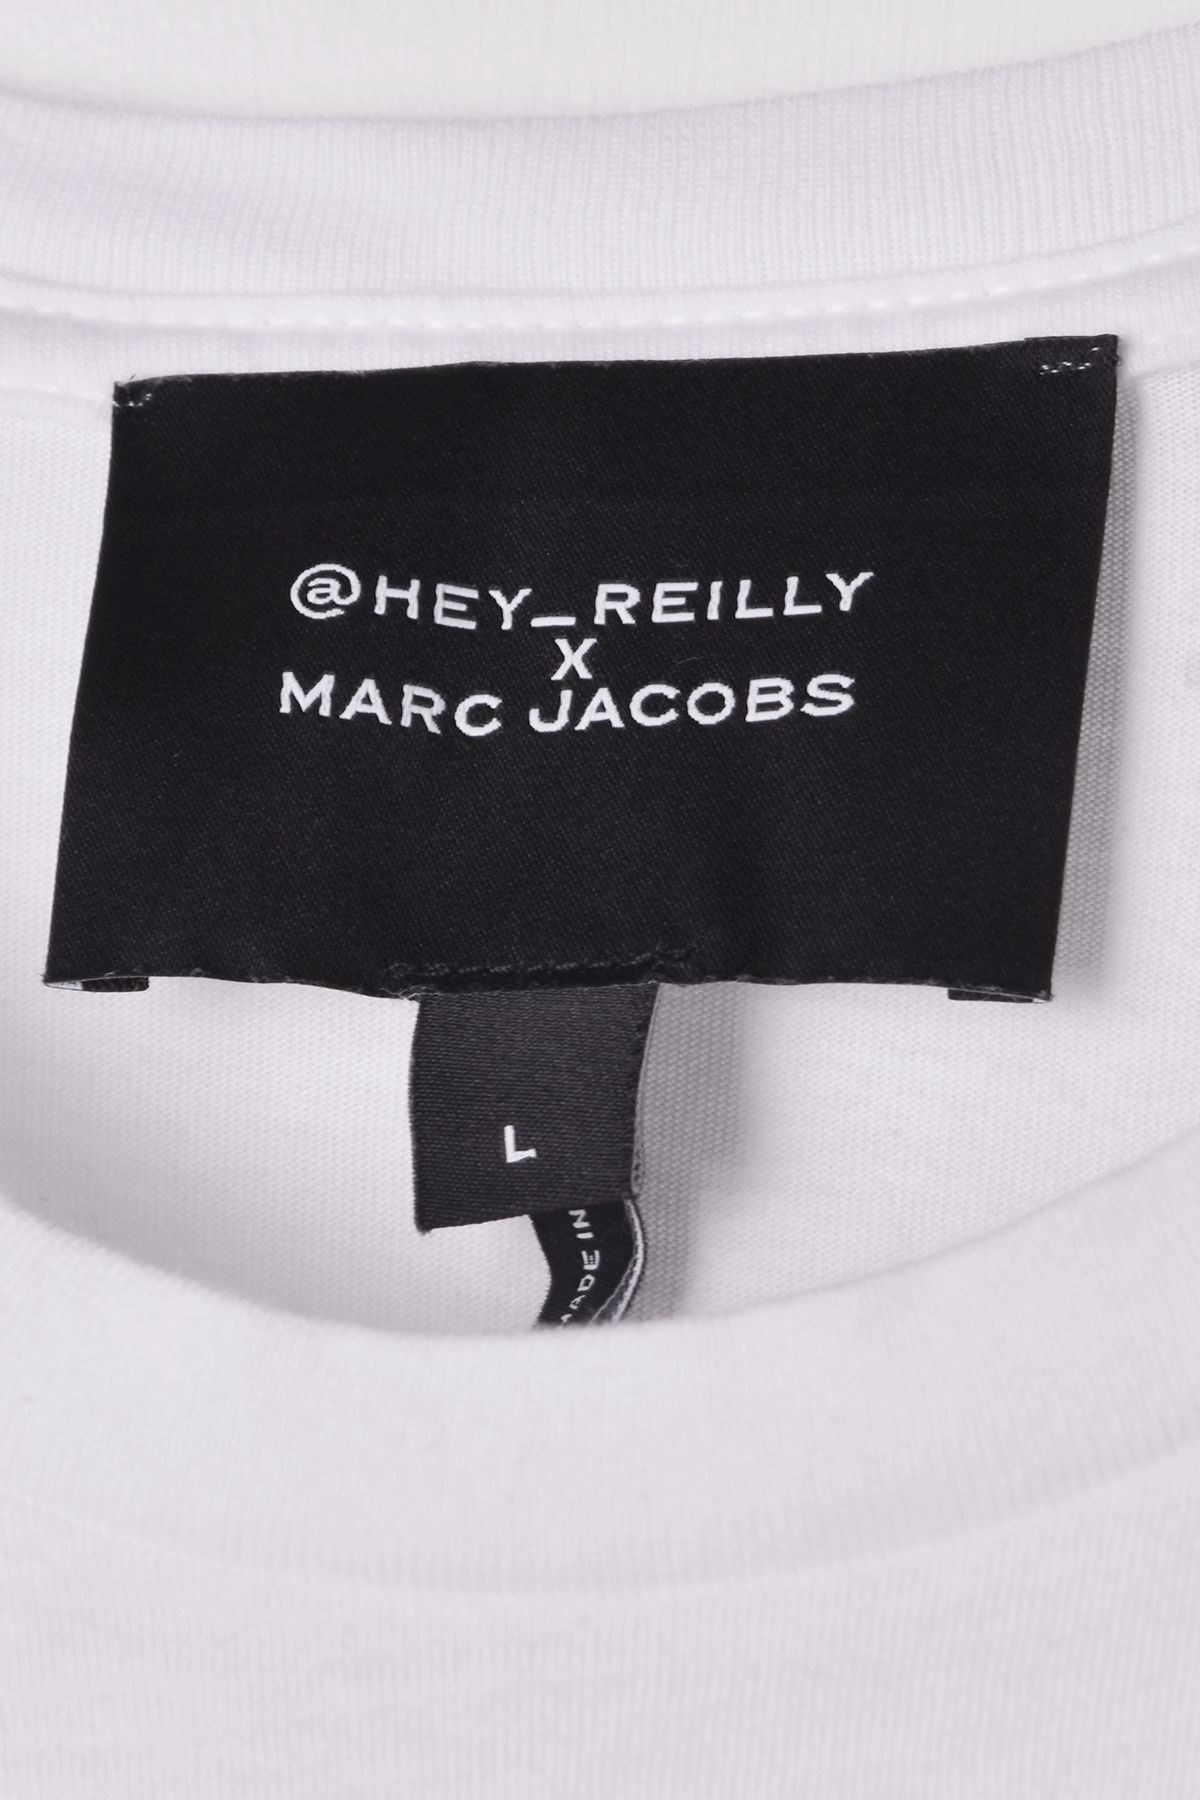 【BRAND VINTAGE】Marc Jacobs x HEY REILLY T-shirt/White #4559 [mn]